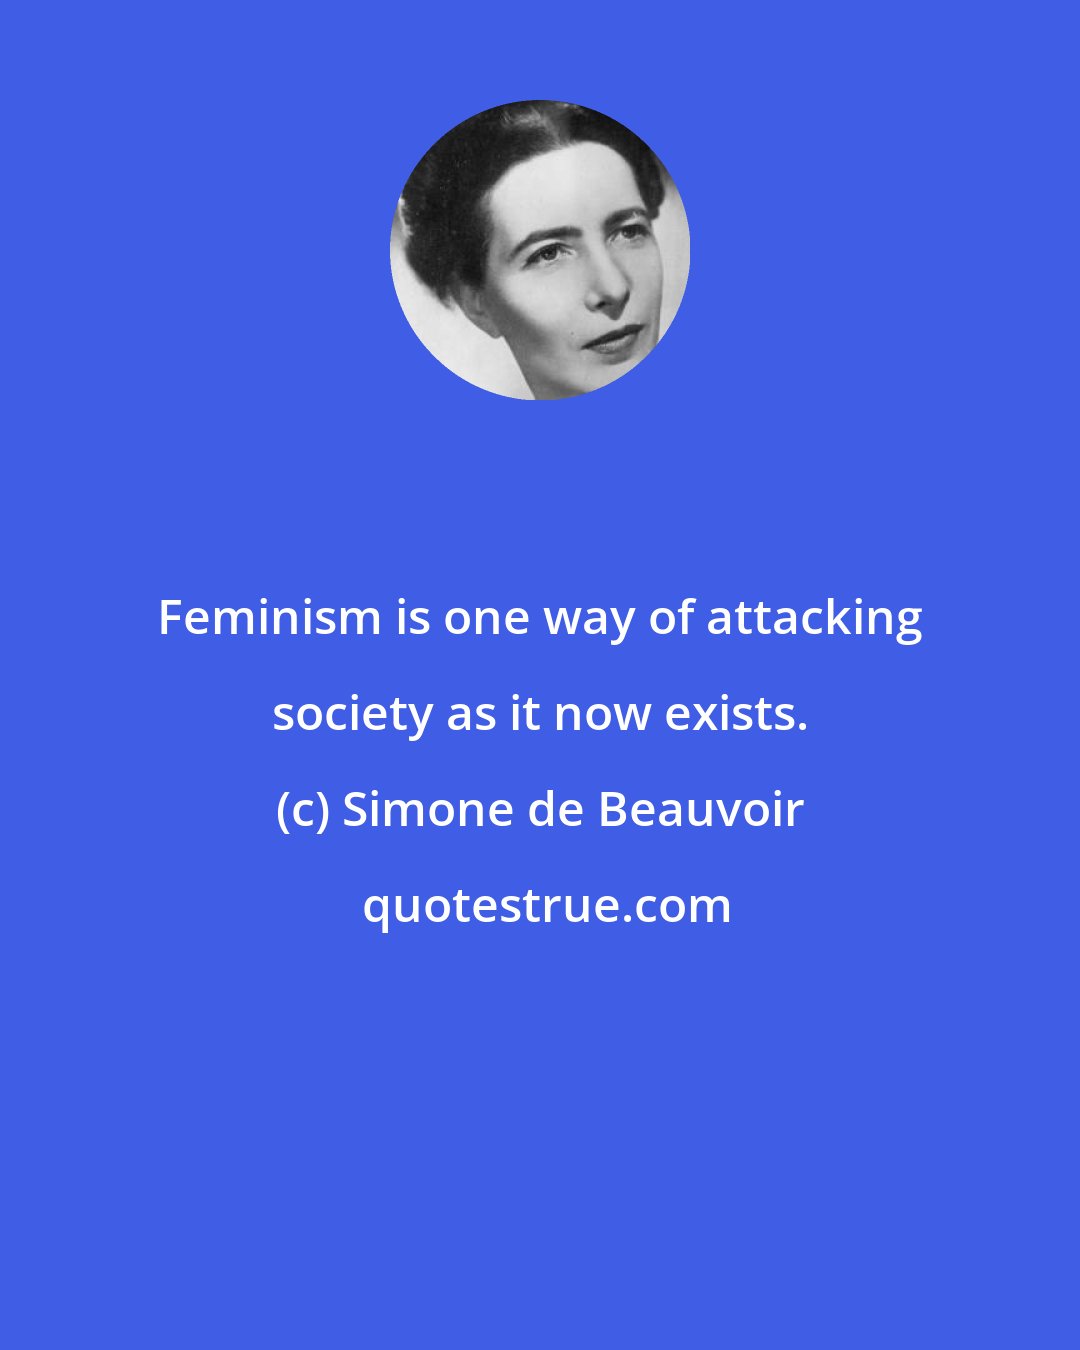 Simone de Beauvoir: Feminism is one way of attacking society as it now exists.